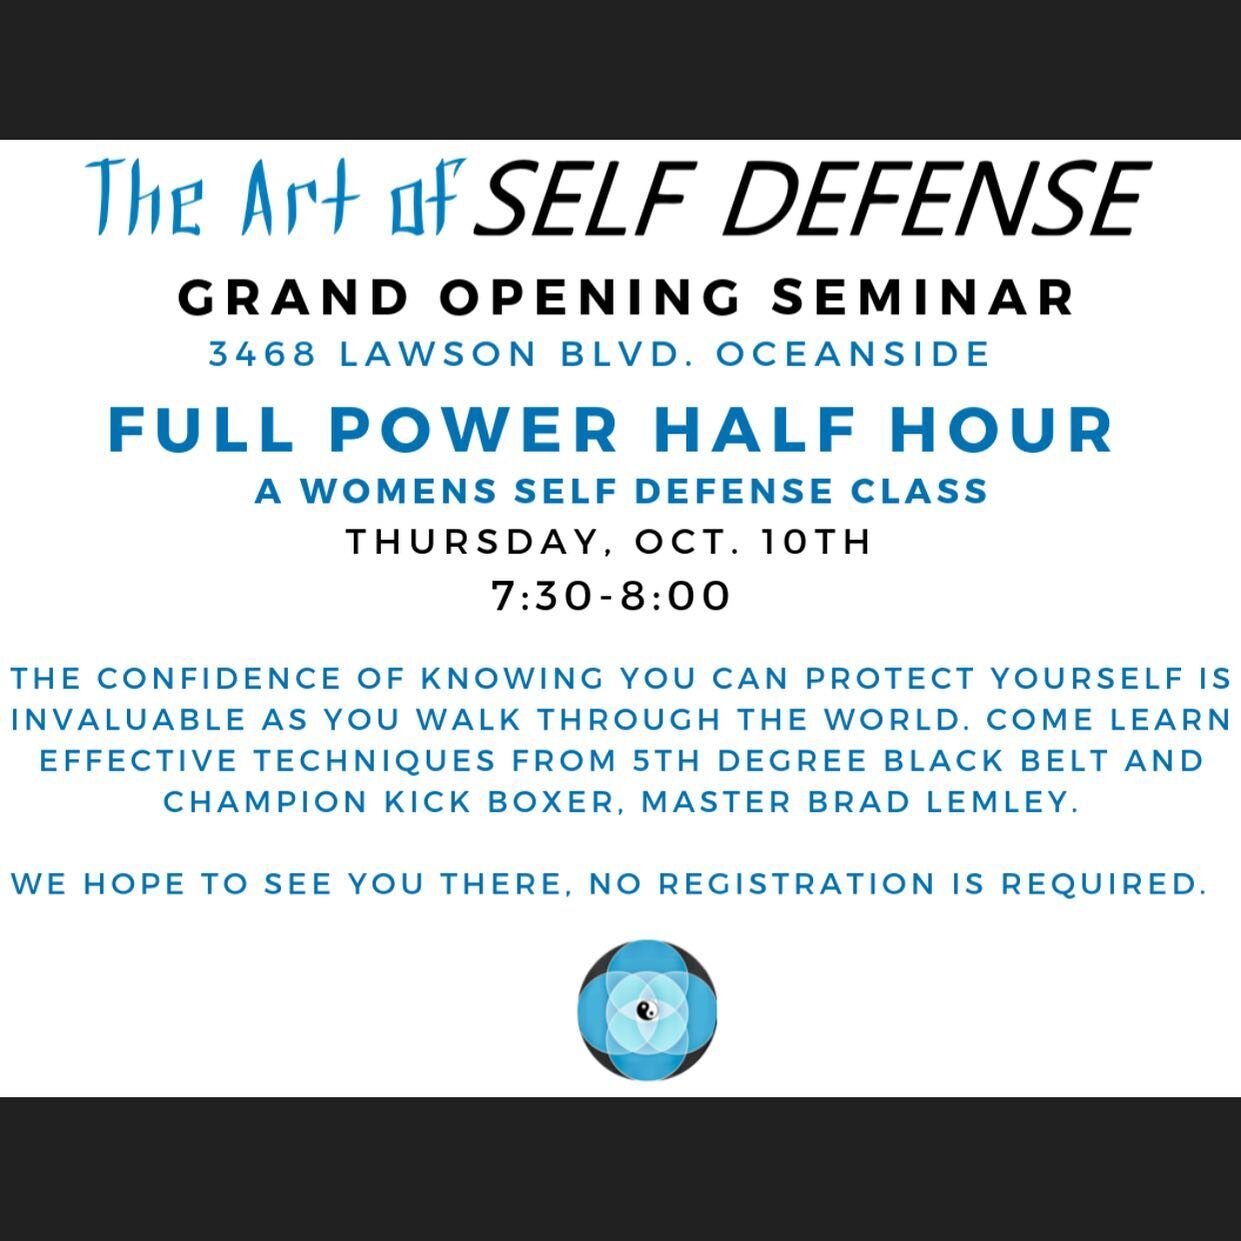 Free women&rsquo;s self defense class! No registration required! Just come down and have fun!